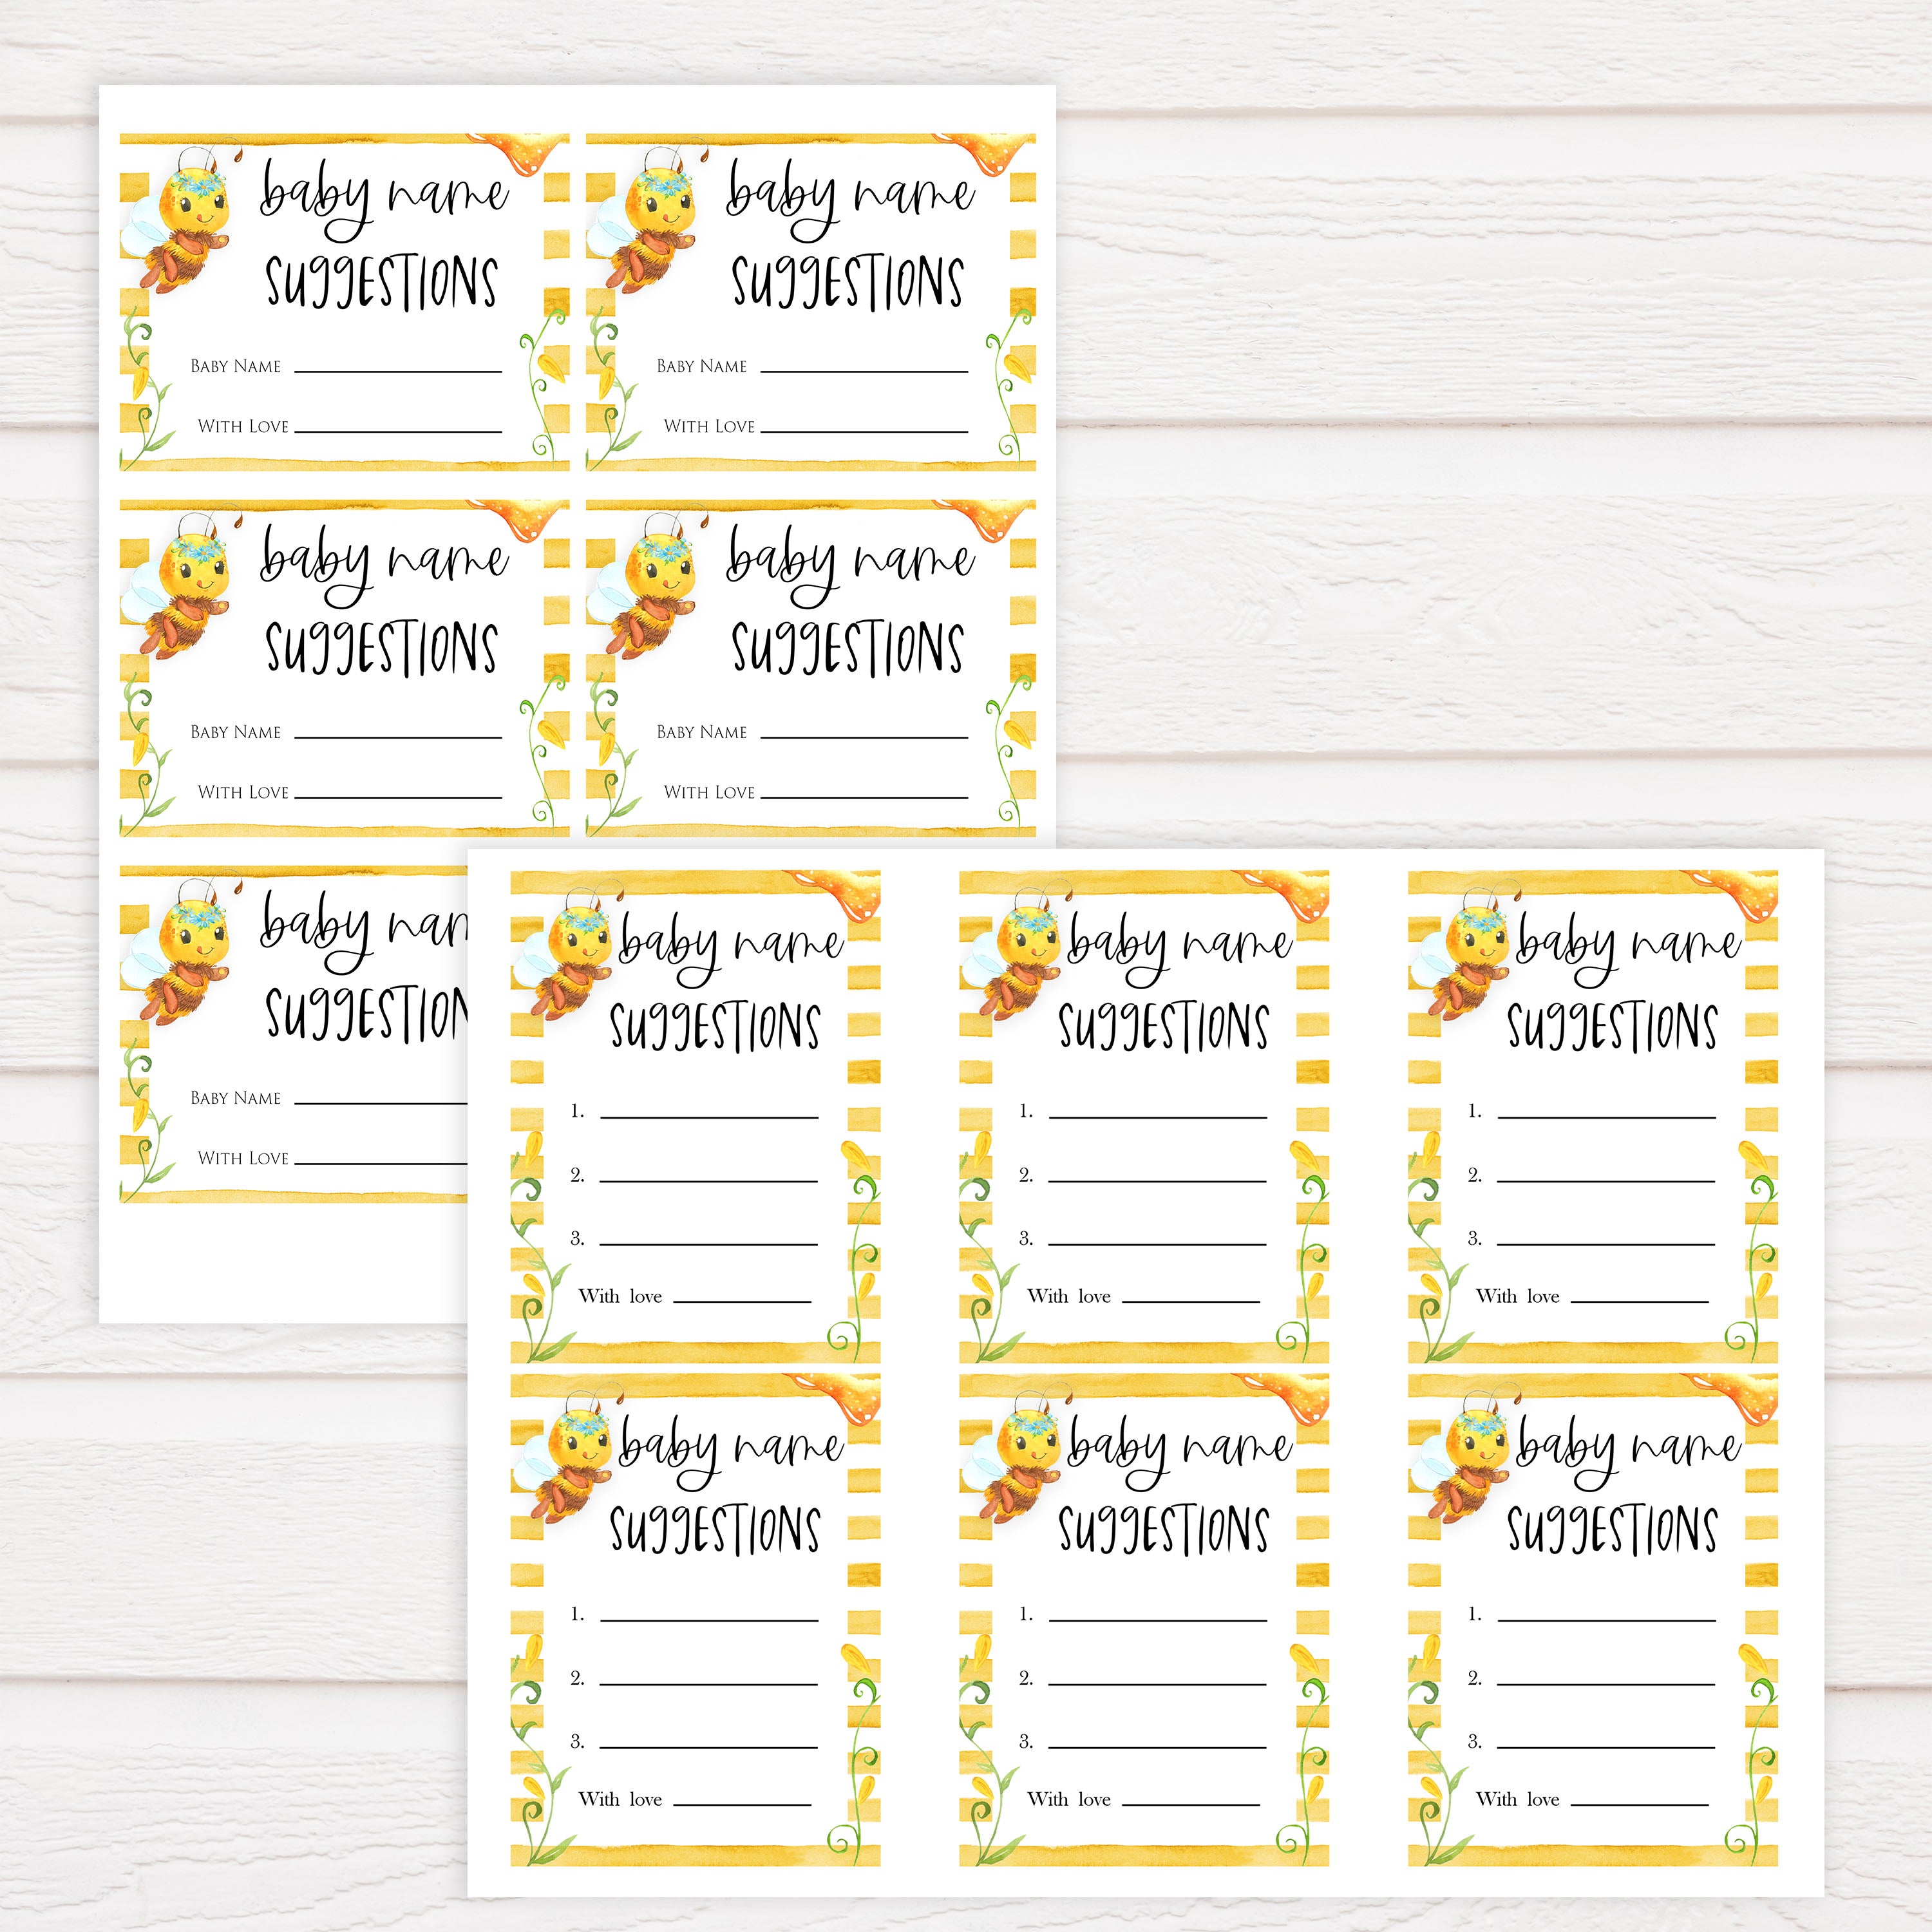 baby name suggestions game, Printable baby shower games, mommy bee fun baby games, baby shower games, fun baby shower ideas, top baby shower ideas, mommy to bee baby shower, friends baby shower ideas